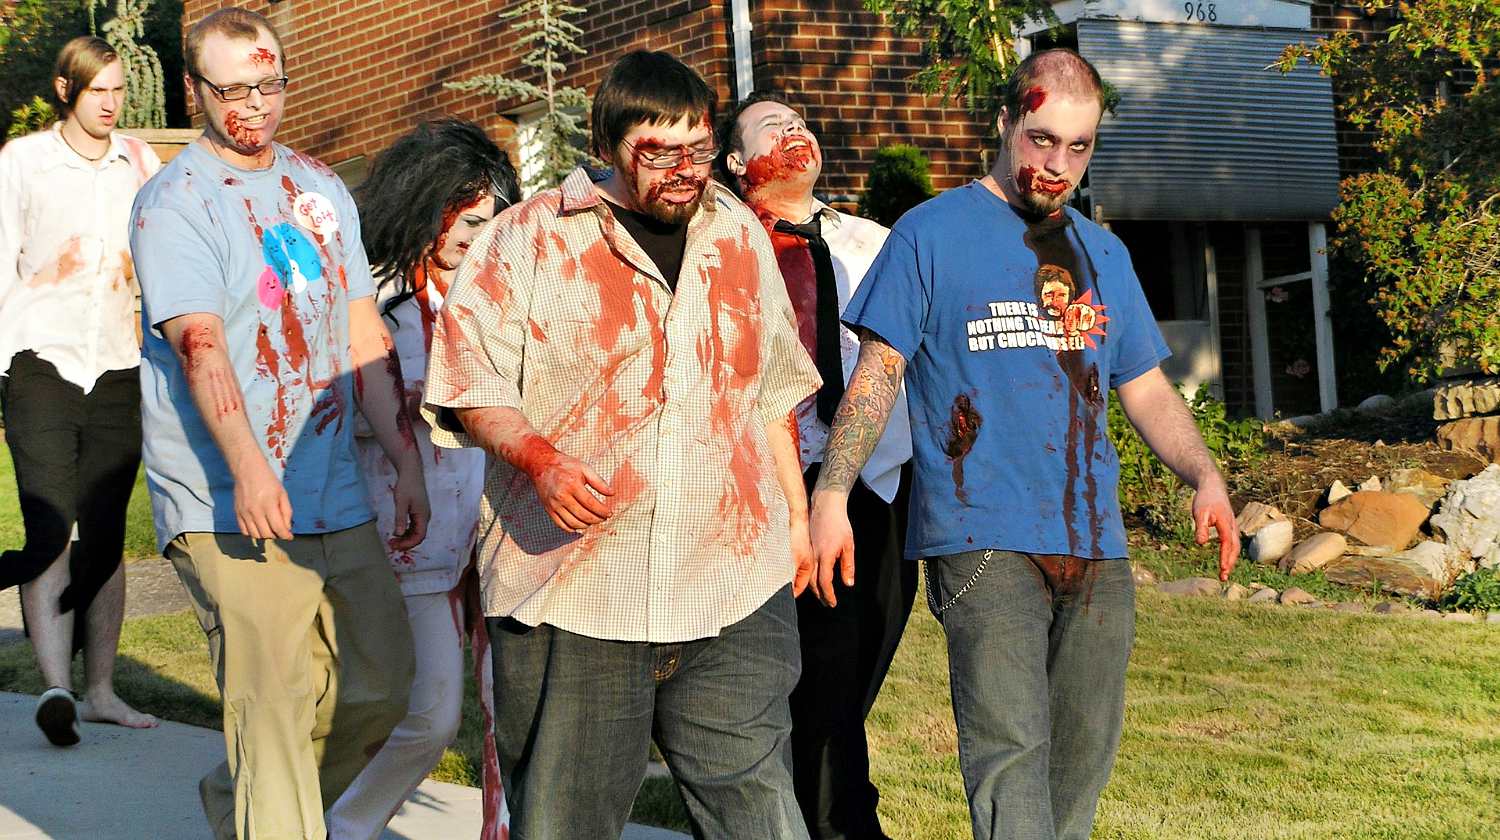 Zombie costume parade | Clever DIY Halloween Costumes For Adults | cute Halloween costumes | Halloween costume ideas | Featured